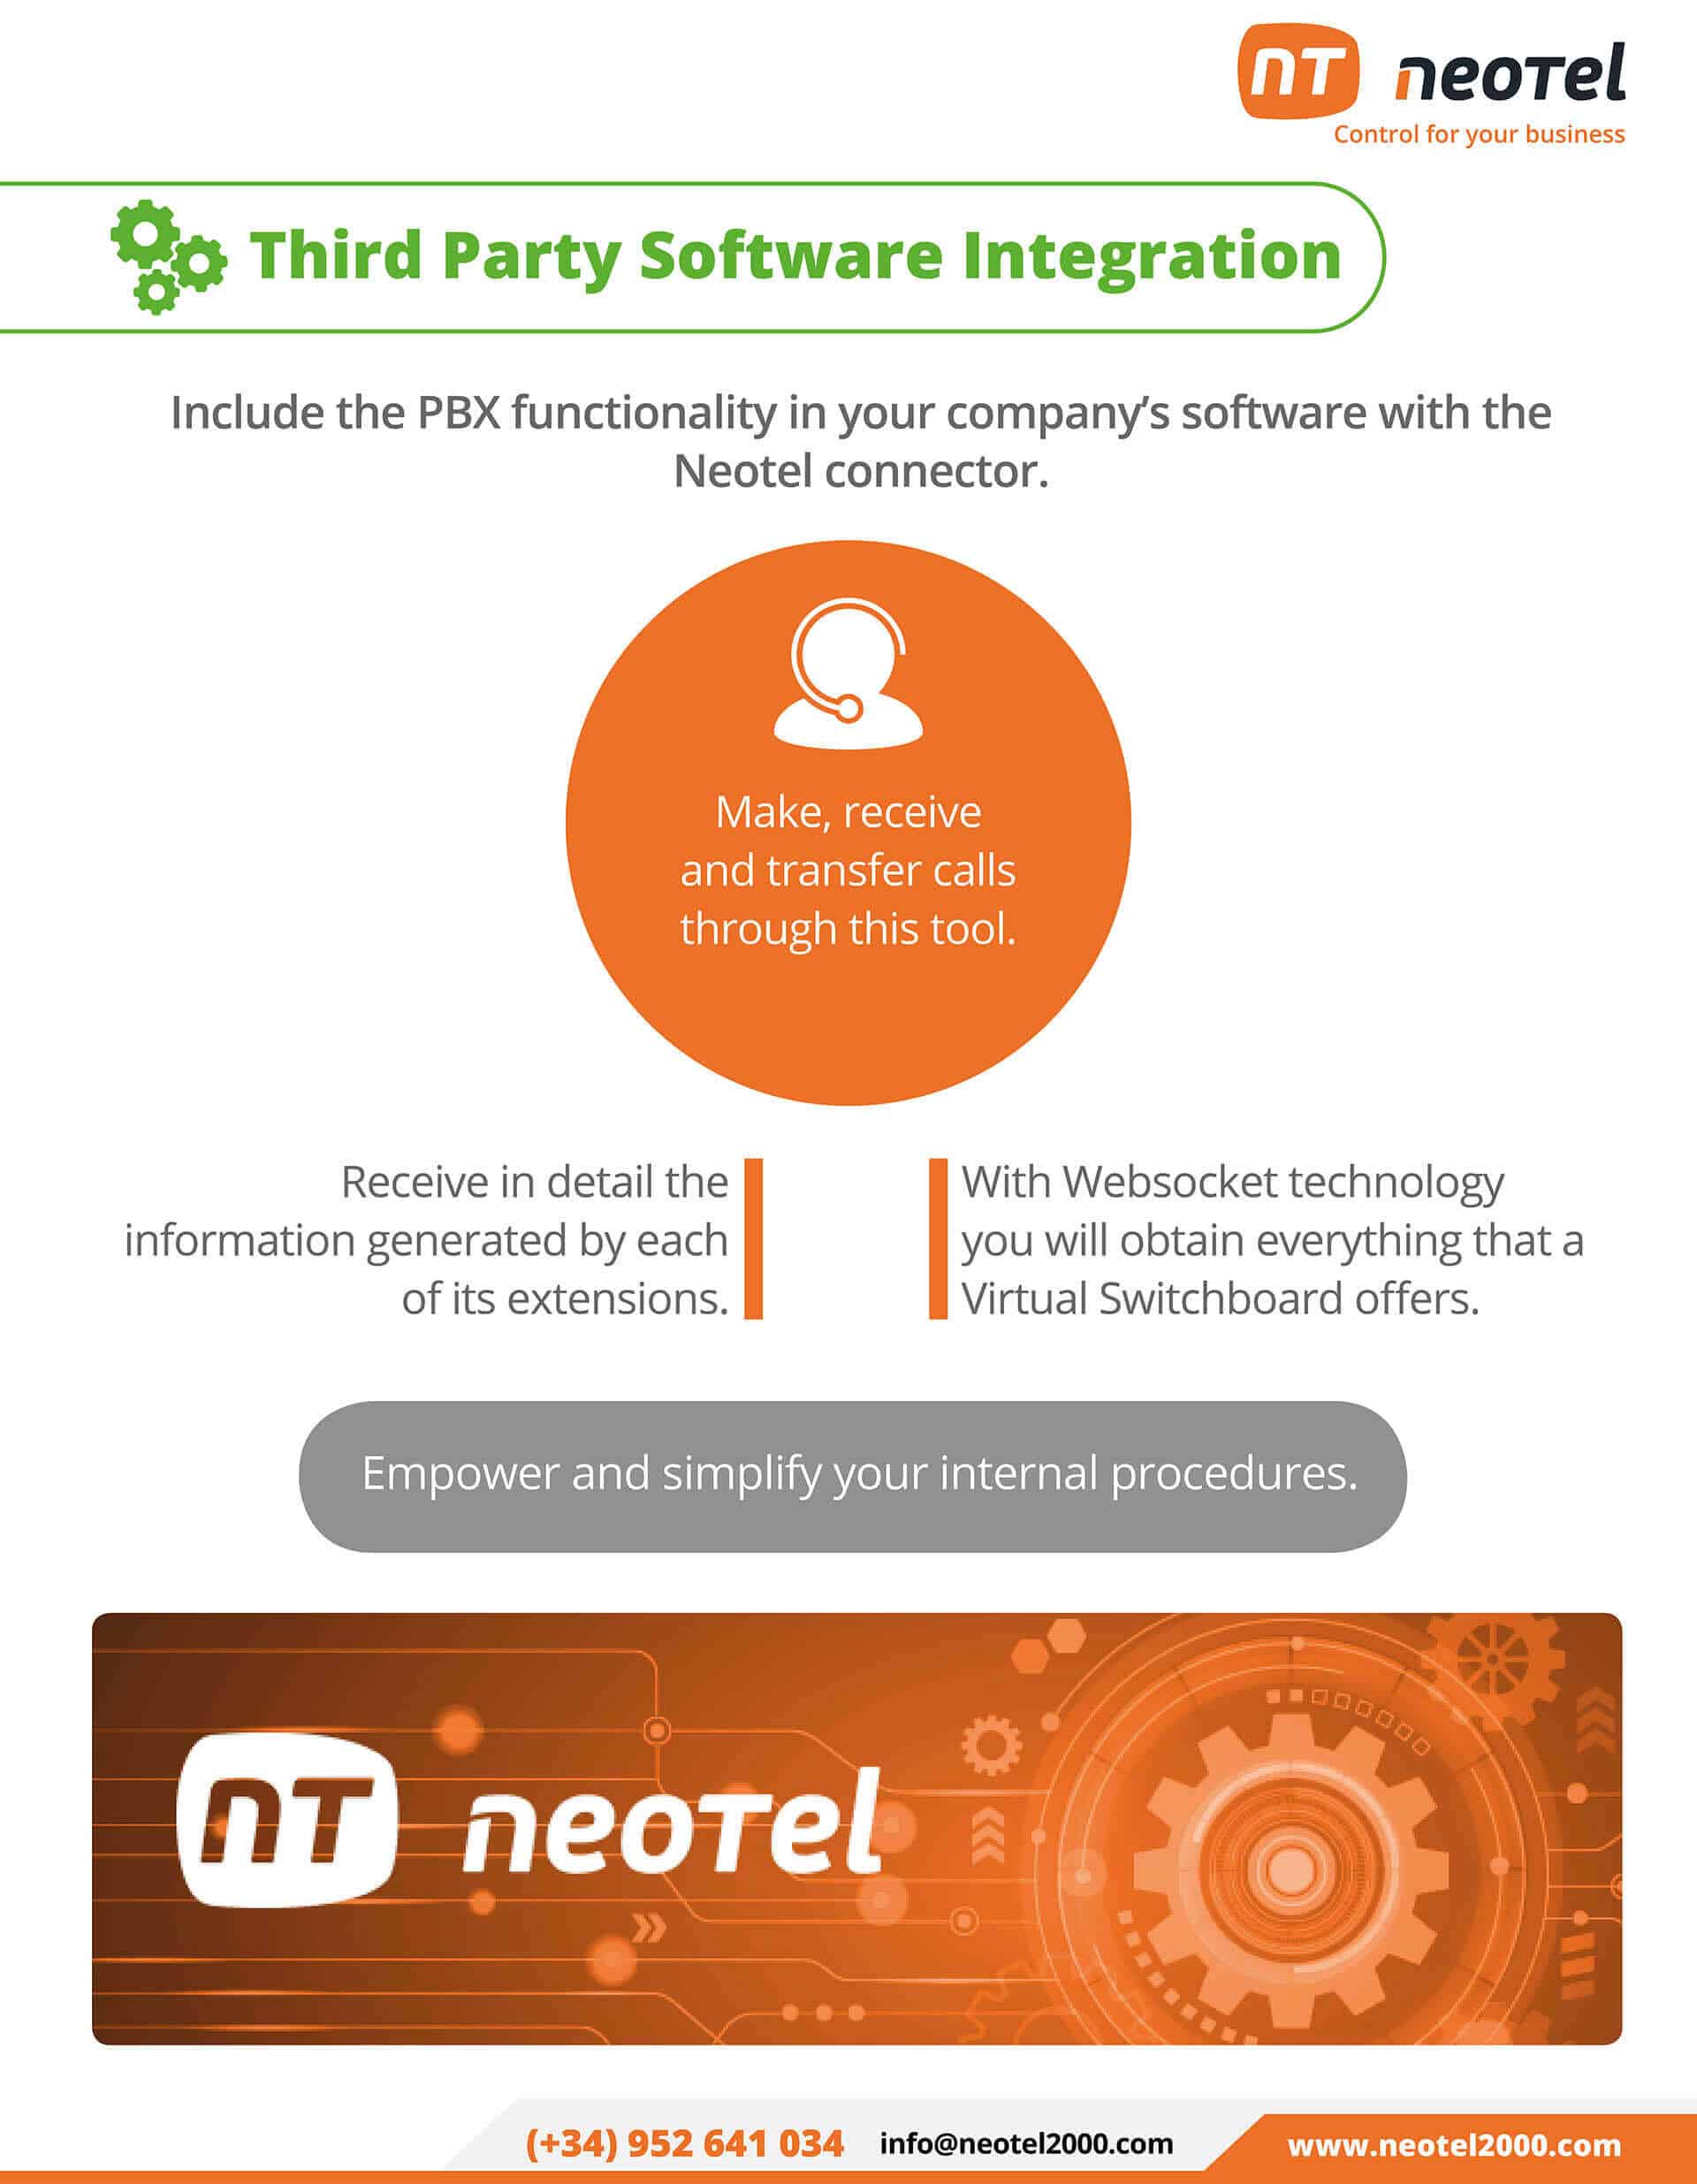 Integrate Virtual Switchboard with Third Party Software